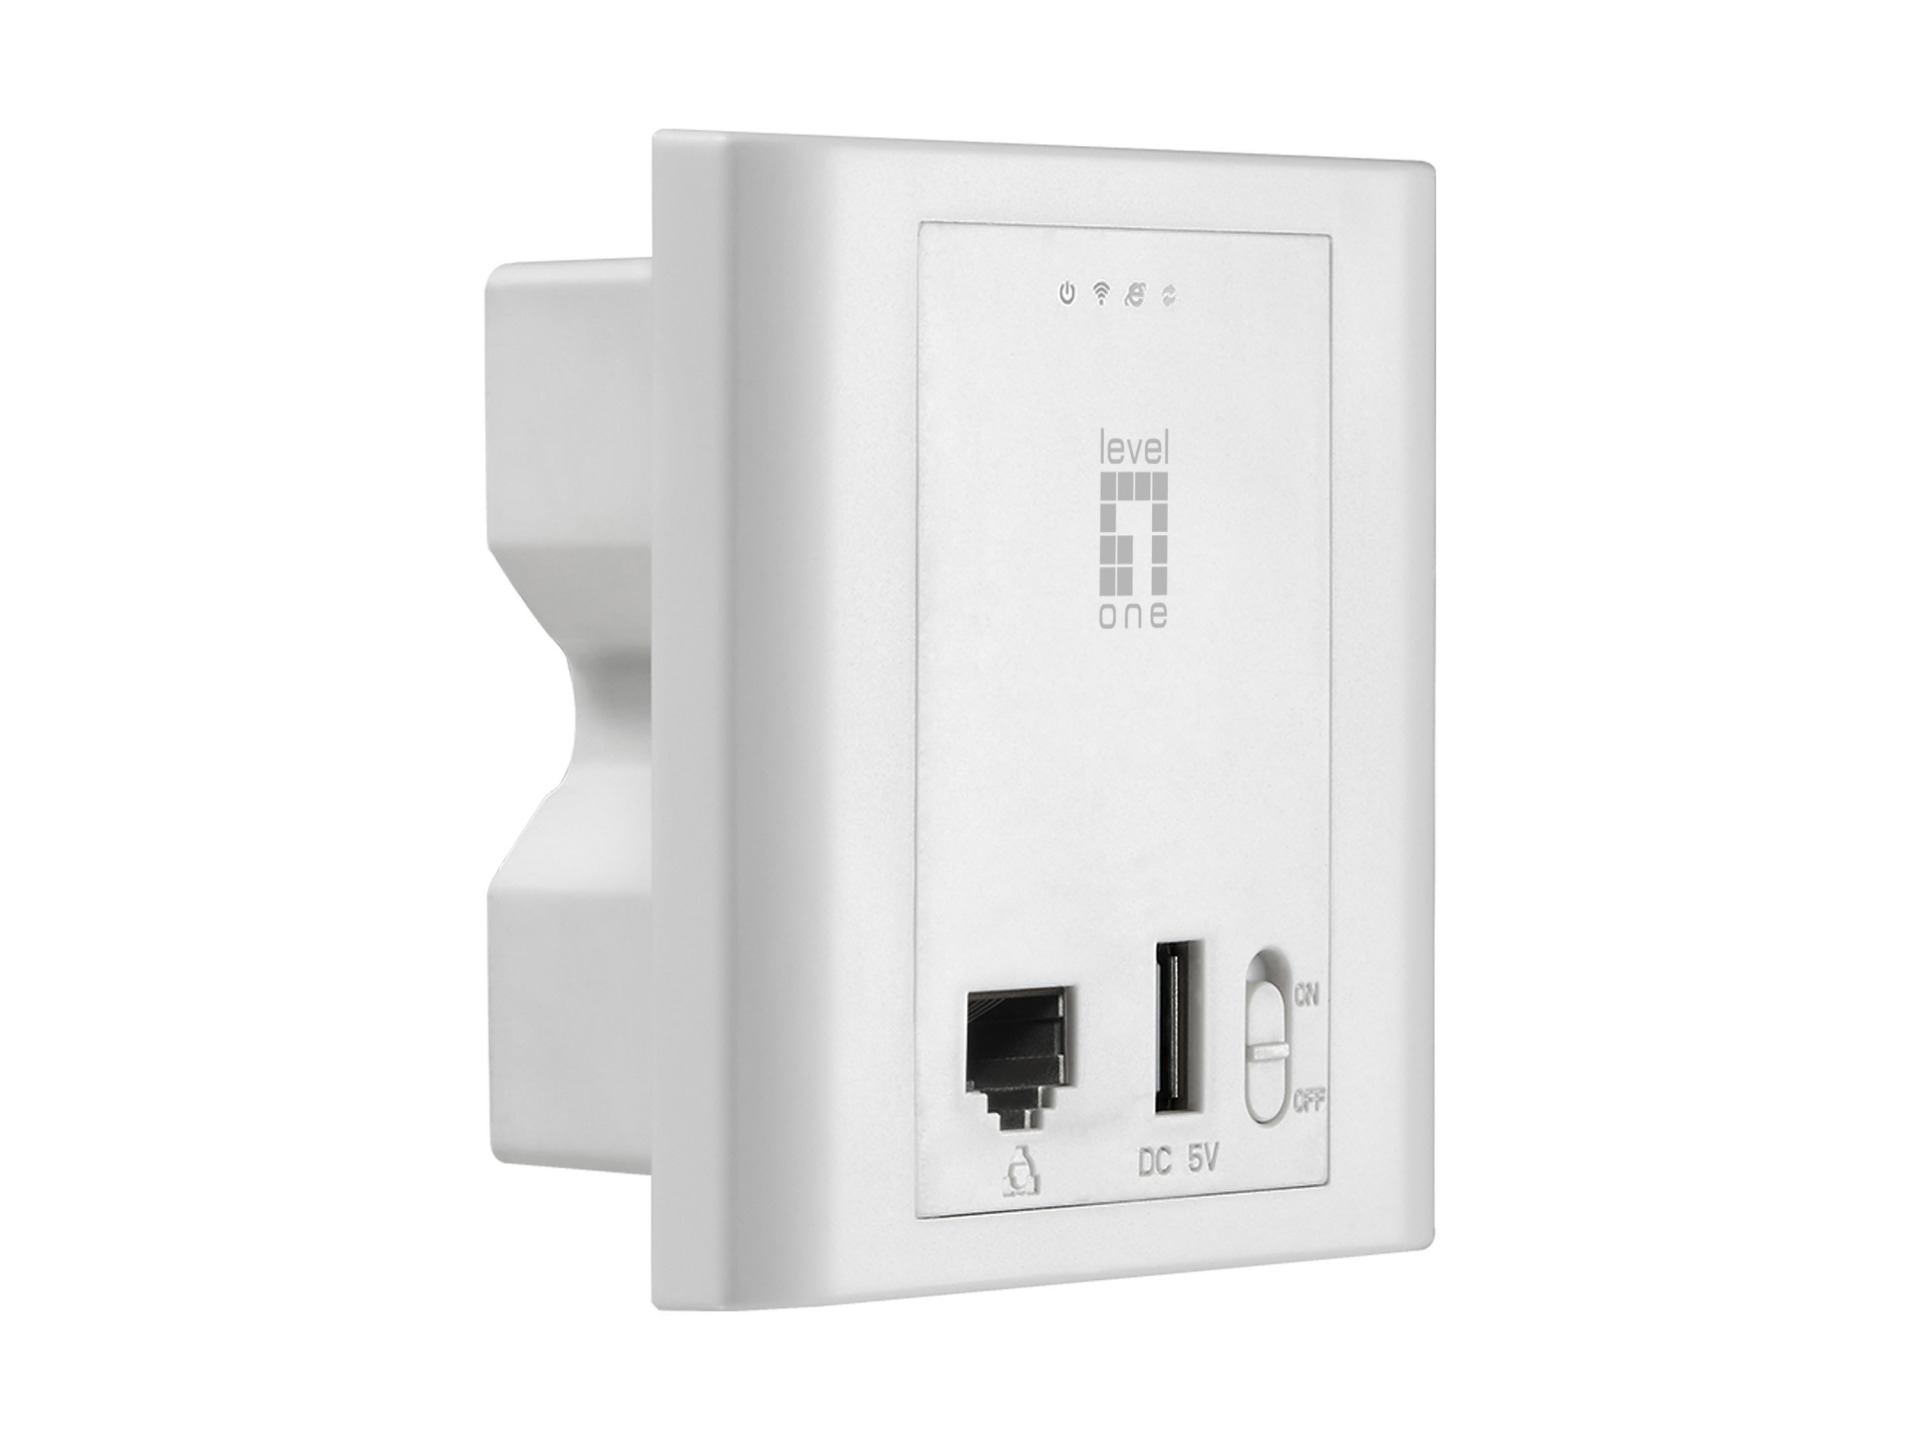 Managed WLAN-Access-Point, PoE, 150Mbps, flush-mounting